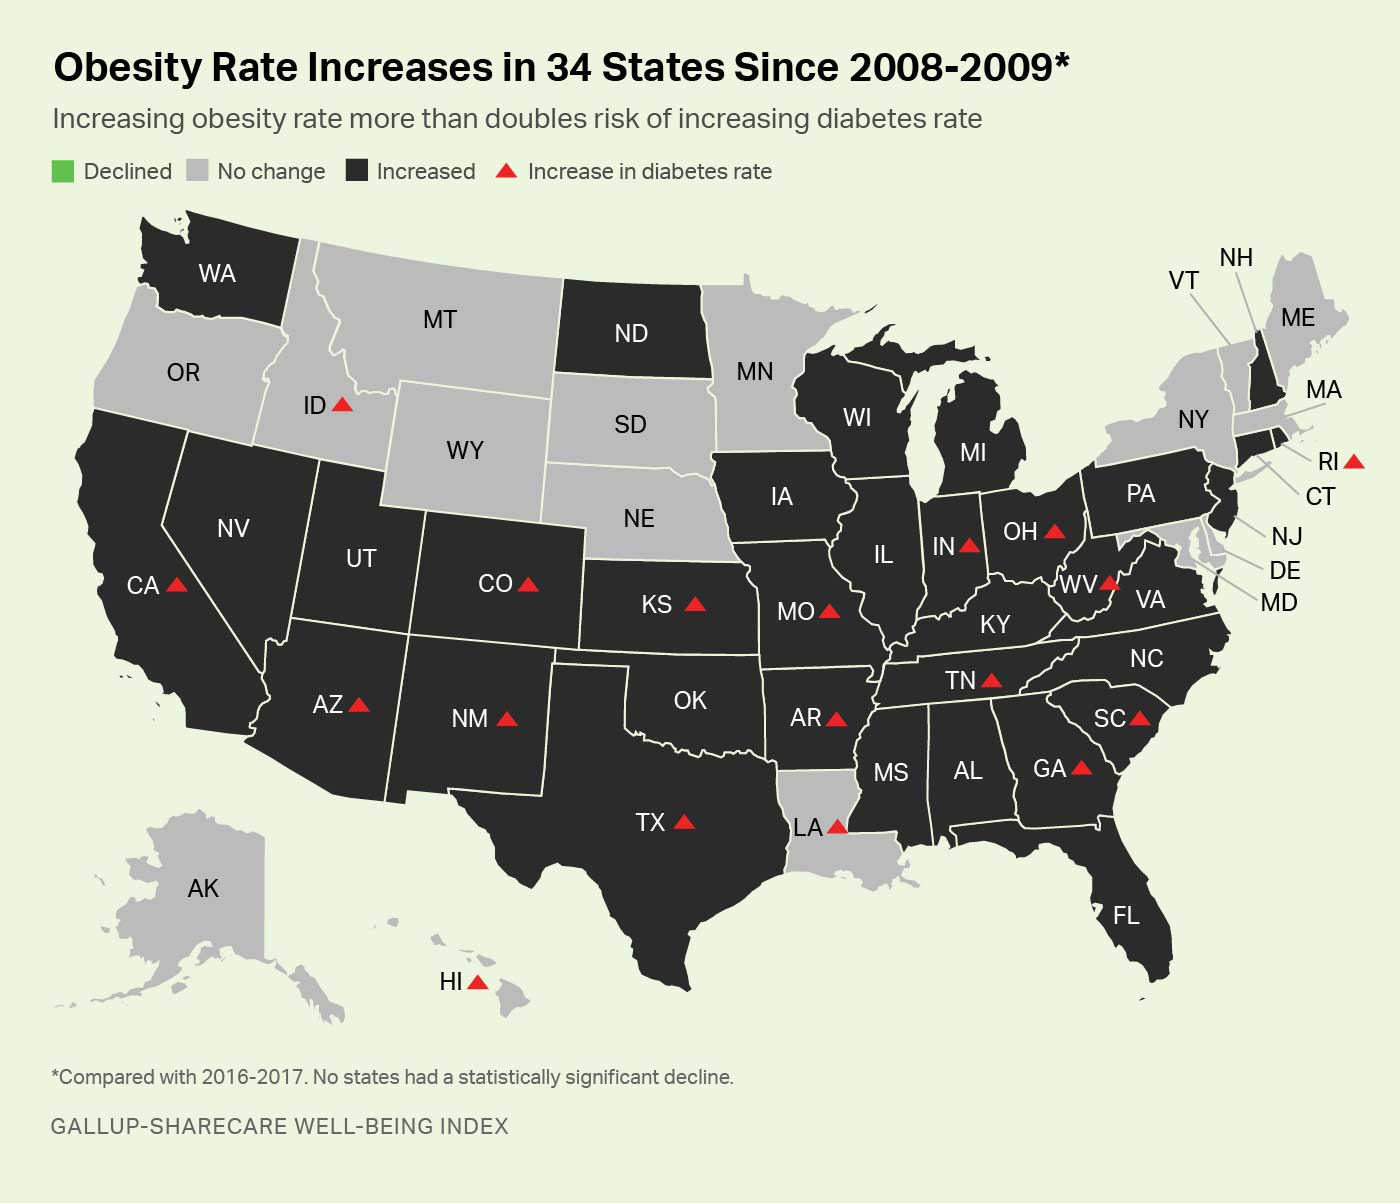   card. Obesity rates have increased in 34 states since 2008-2009; these rates have not declined in any US state. 